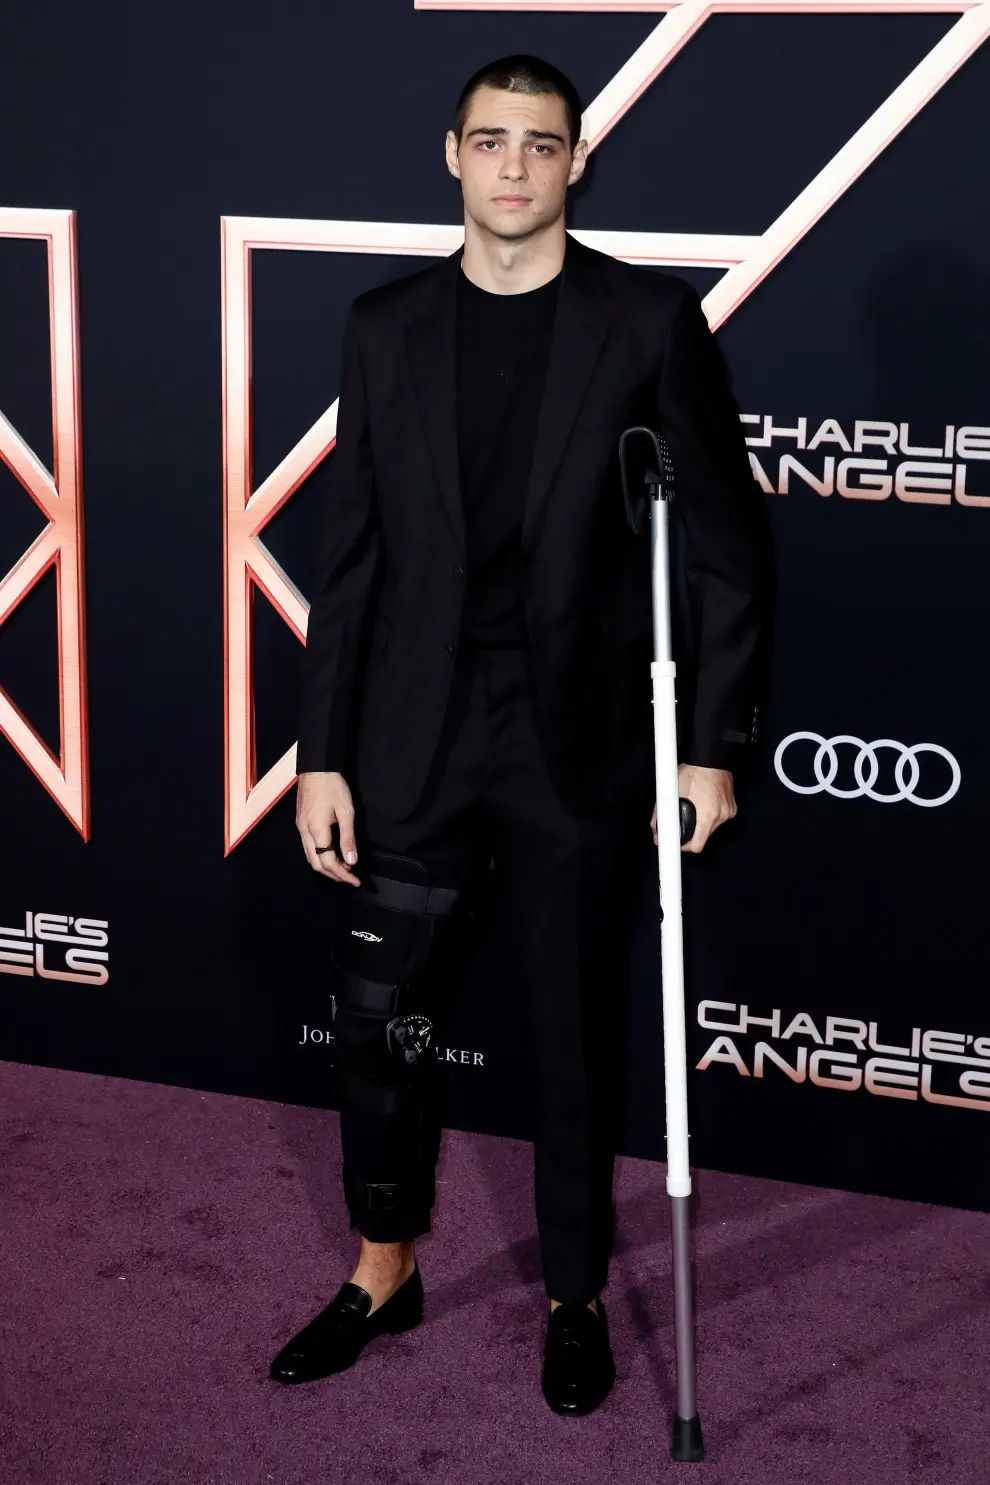 Los Angeles (United States), 12/11/2019.- US-Greek screenwriter Evan Spiliotopoulos poses on the red carpet during the premiere of 'Charlie's Angels' at the Westwood Regency Theater in Los Angeles, California, USA, 11 November 2019. The movie is to be released in US theaters on 15 November. (Cine, Estados Unidos) EFE/EPA/ETIENNE LAURENT Charlie's Angels premiere in Los Angeles